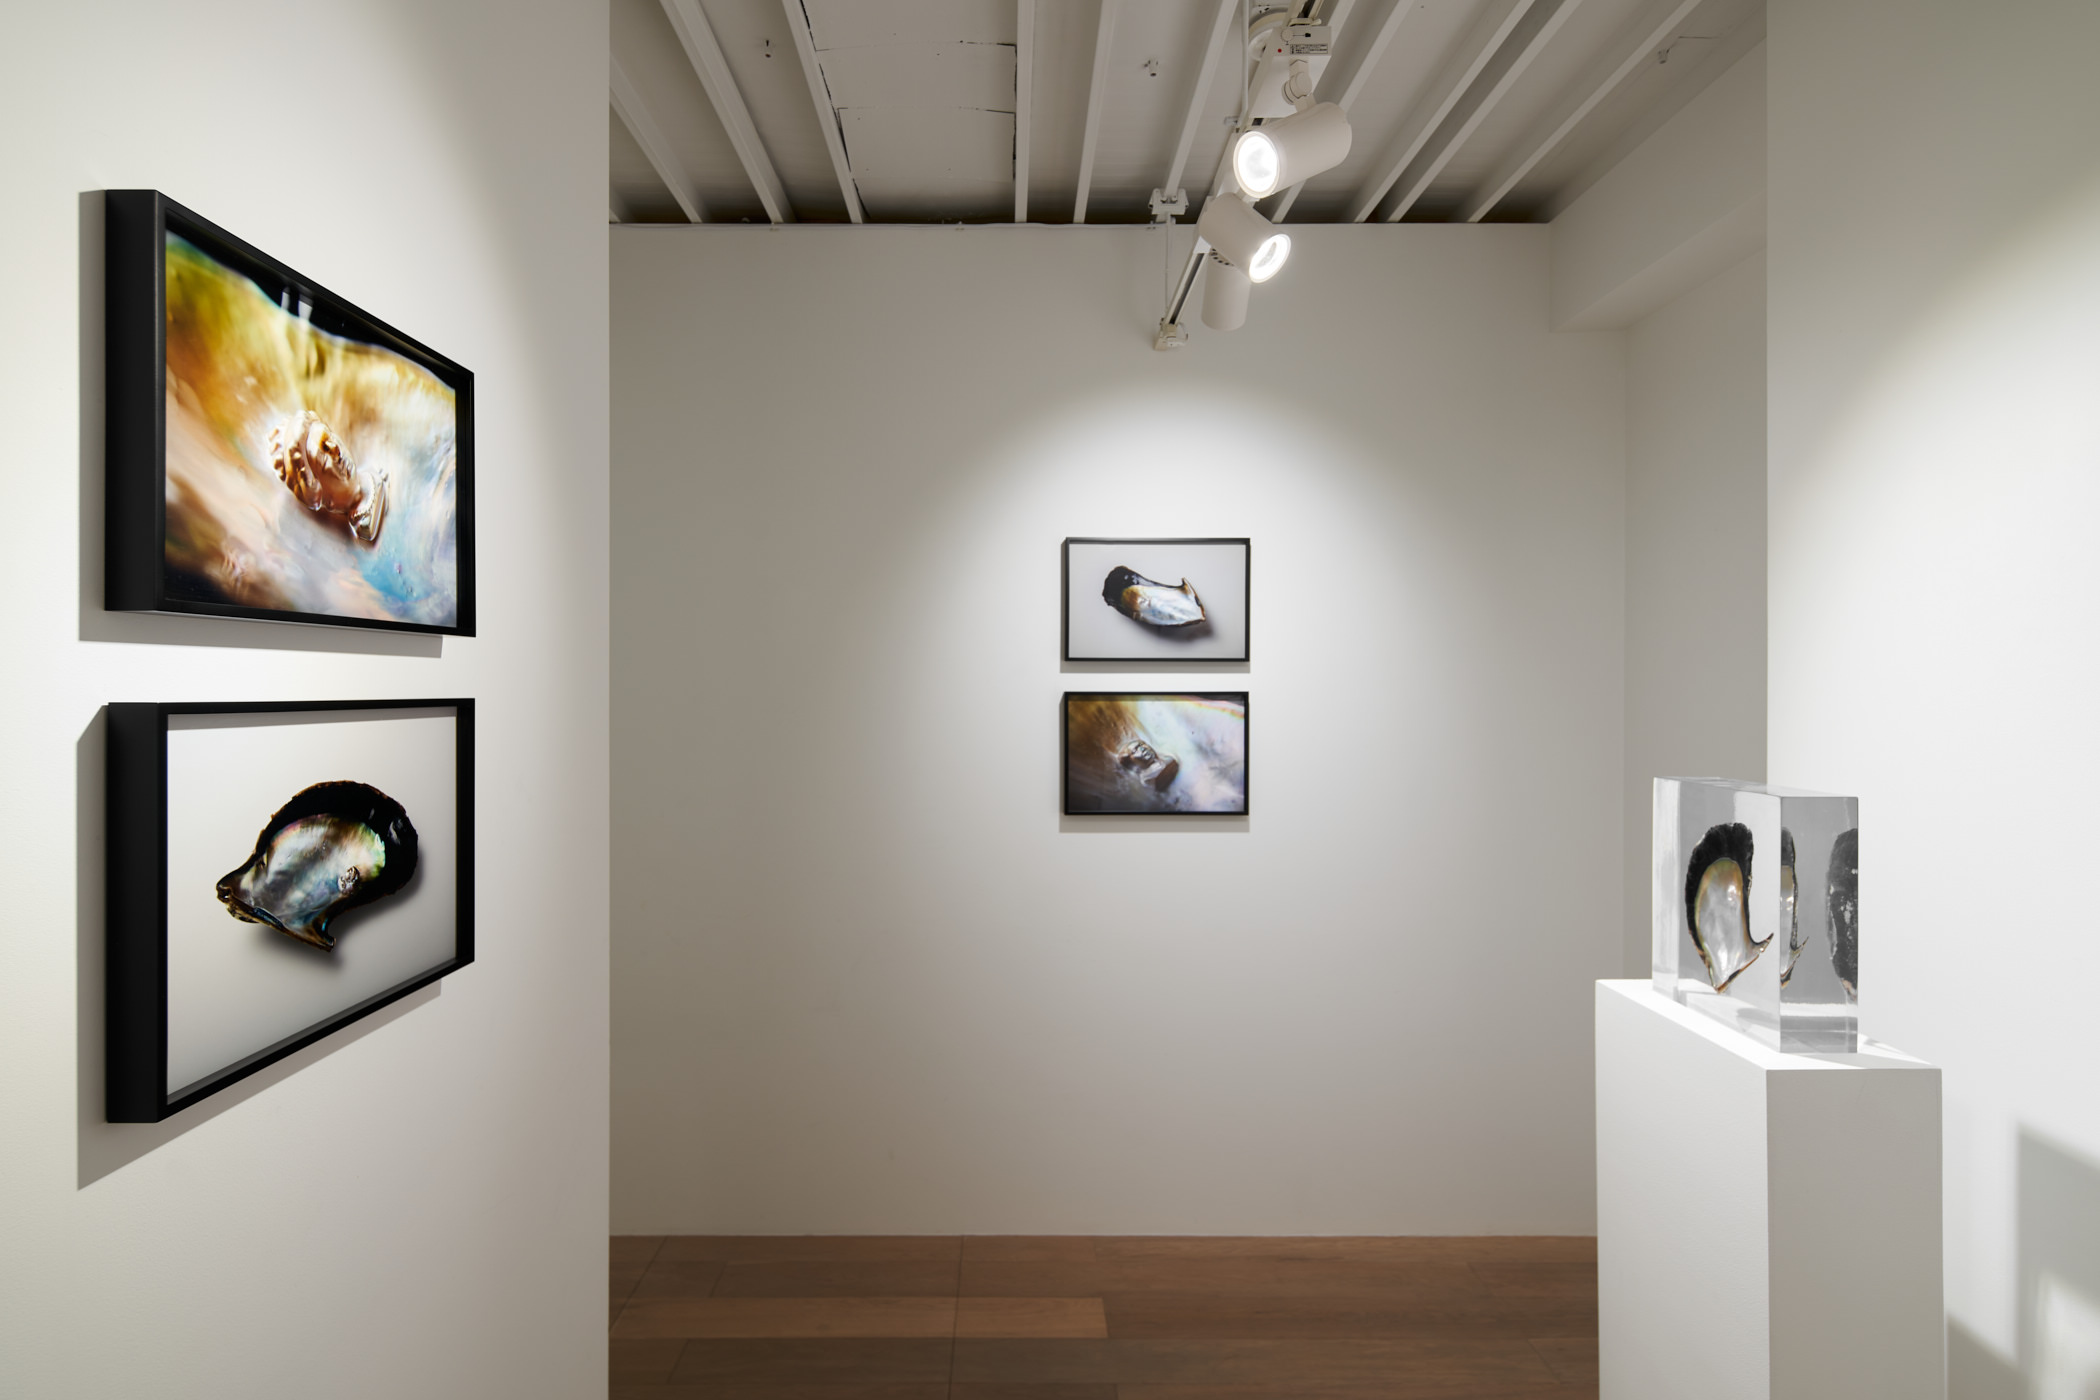 Installation view of Solo Exhibition “Memory of Currency”